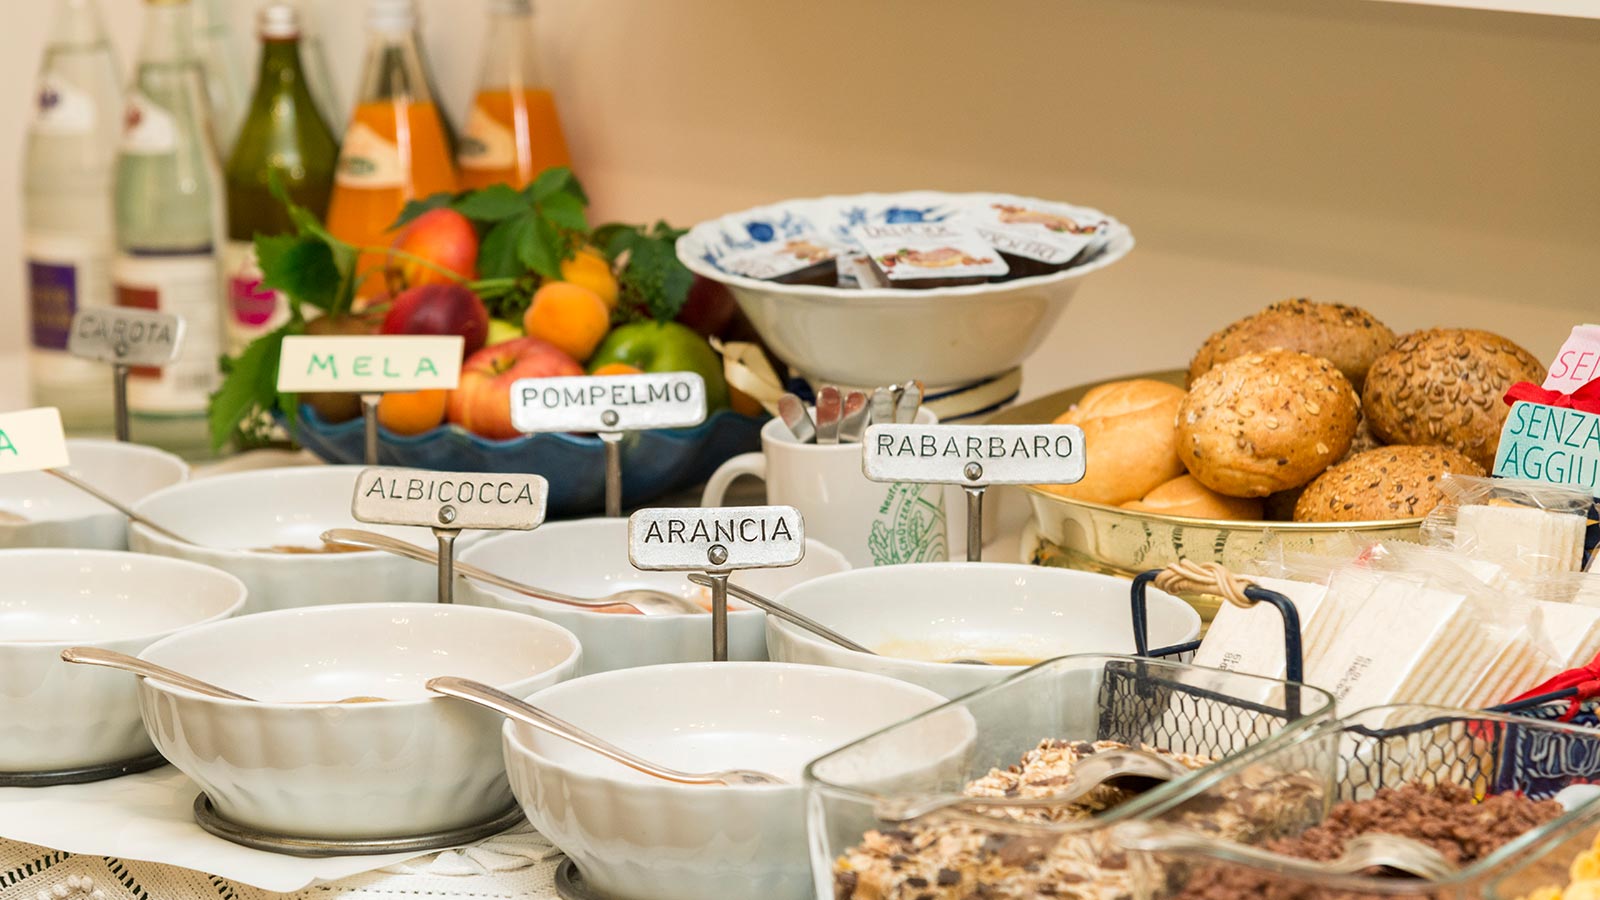 Breakfast buffet with a wide range of local products